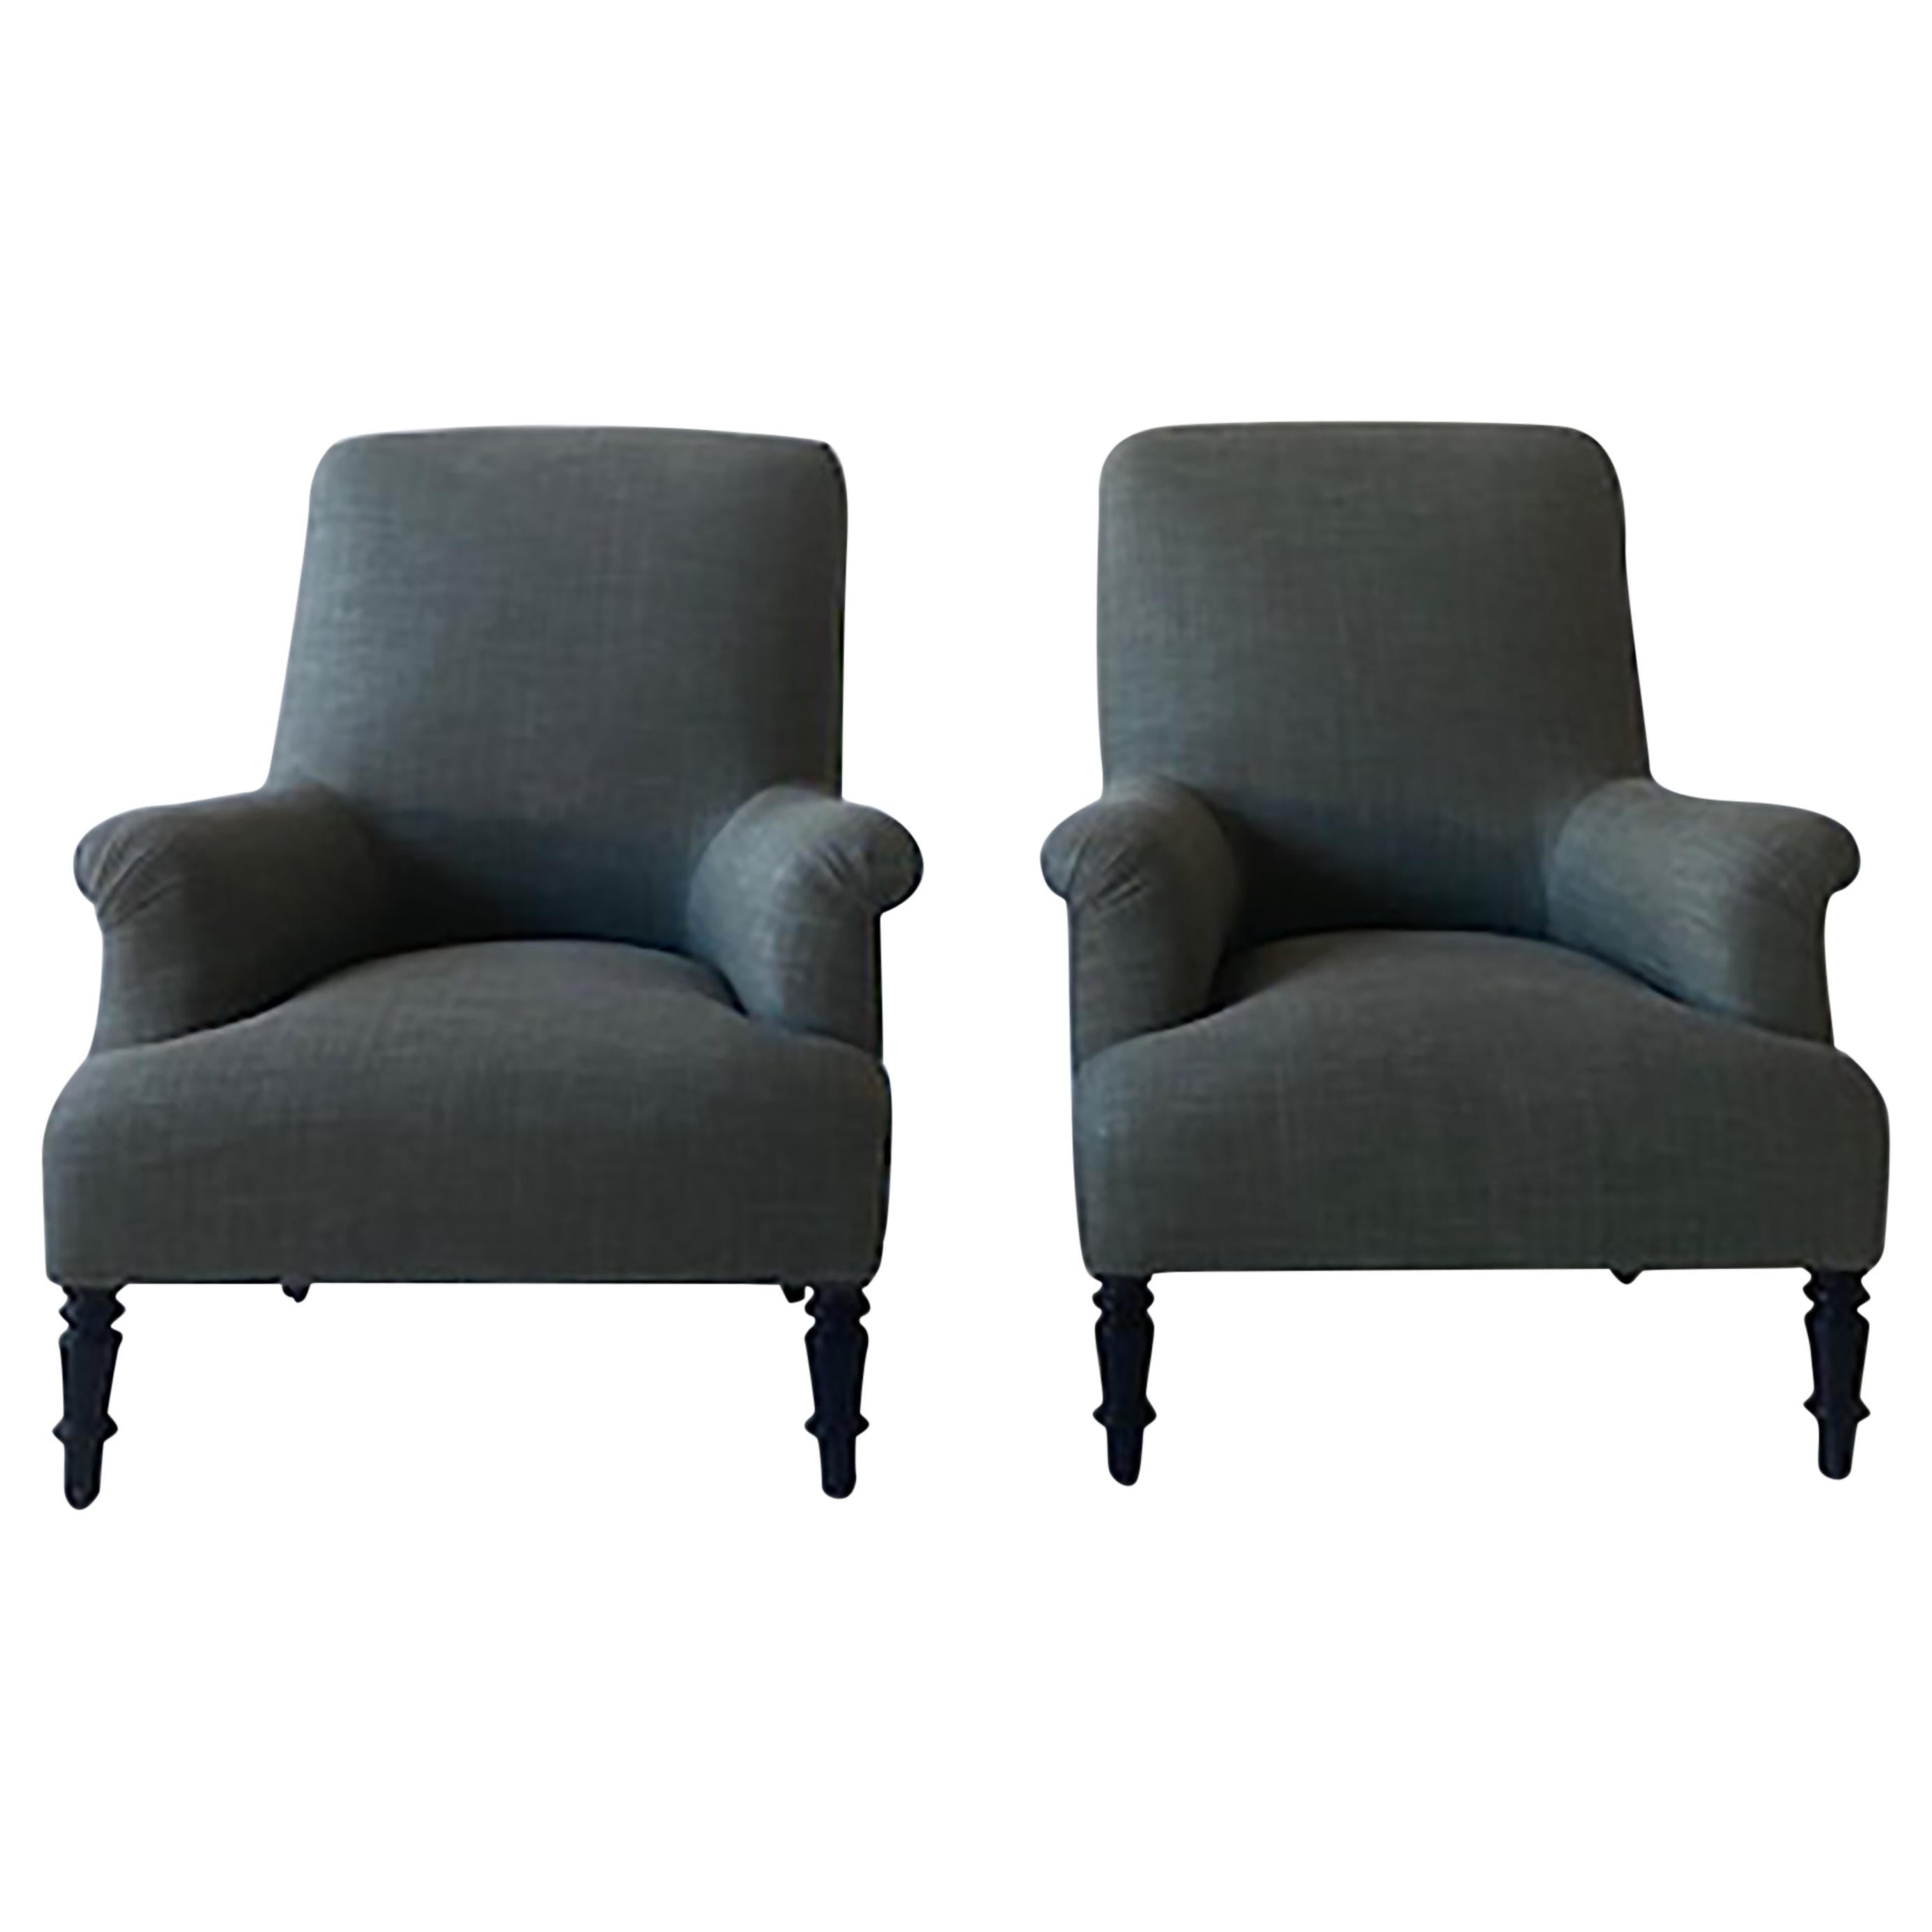 Pair of French High Back Club Chairs